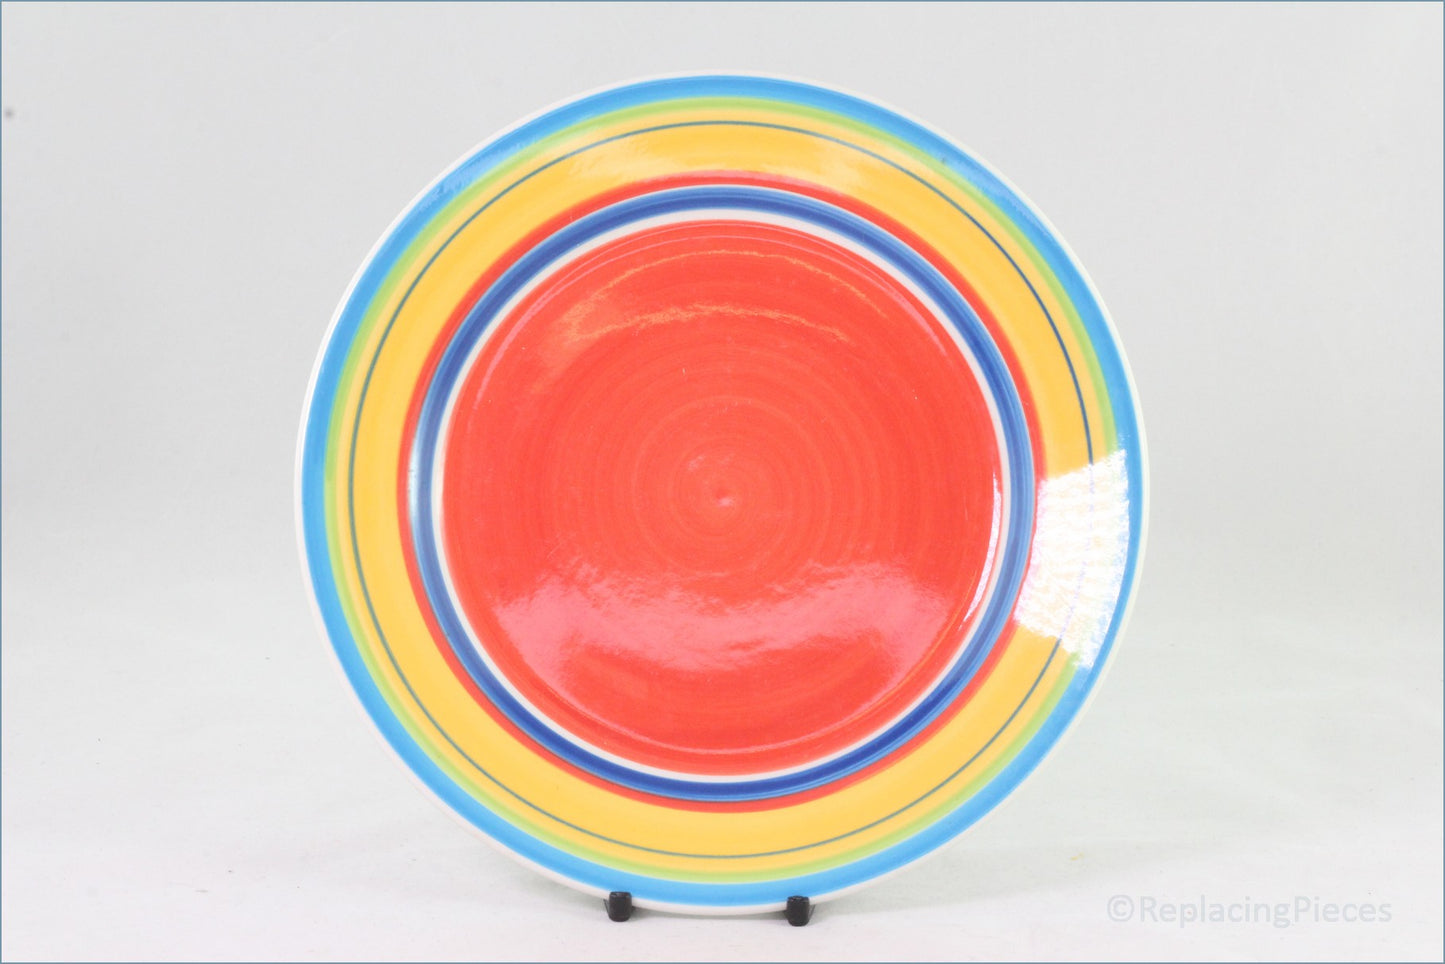 RPW175 - Whittards - 8" Salad Plate (Red - Blue, Green, Yellow Rim)